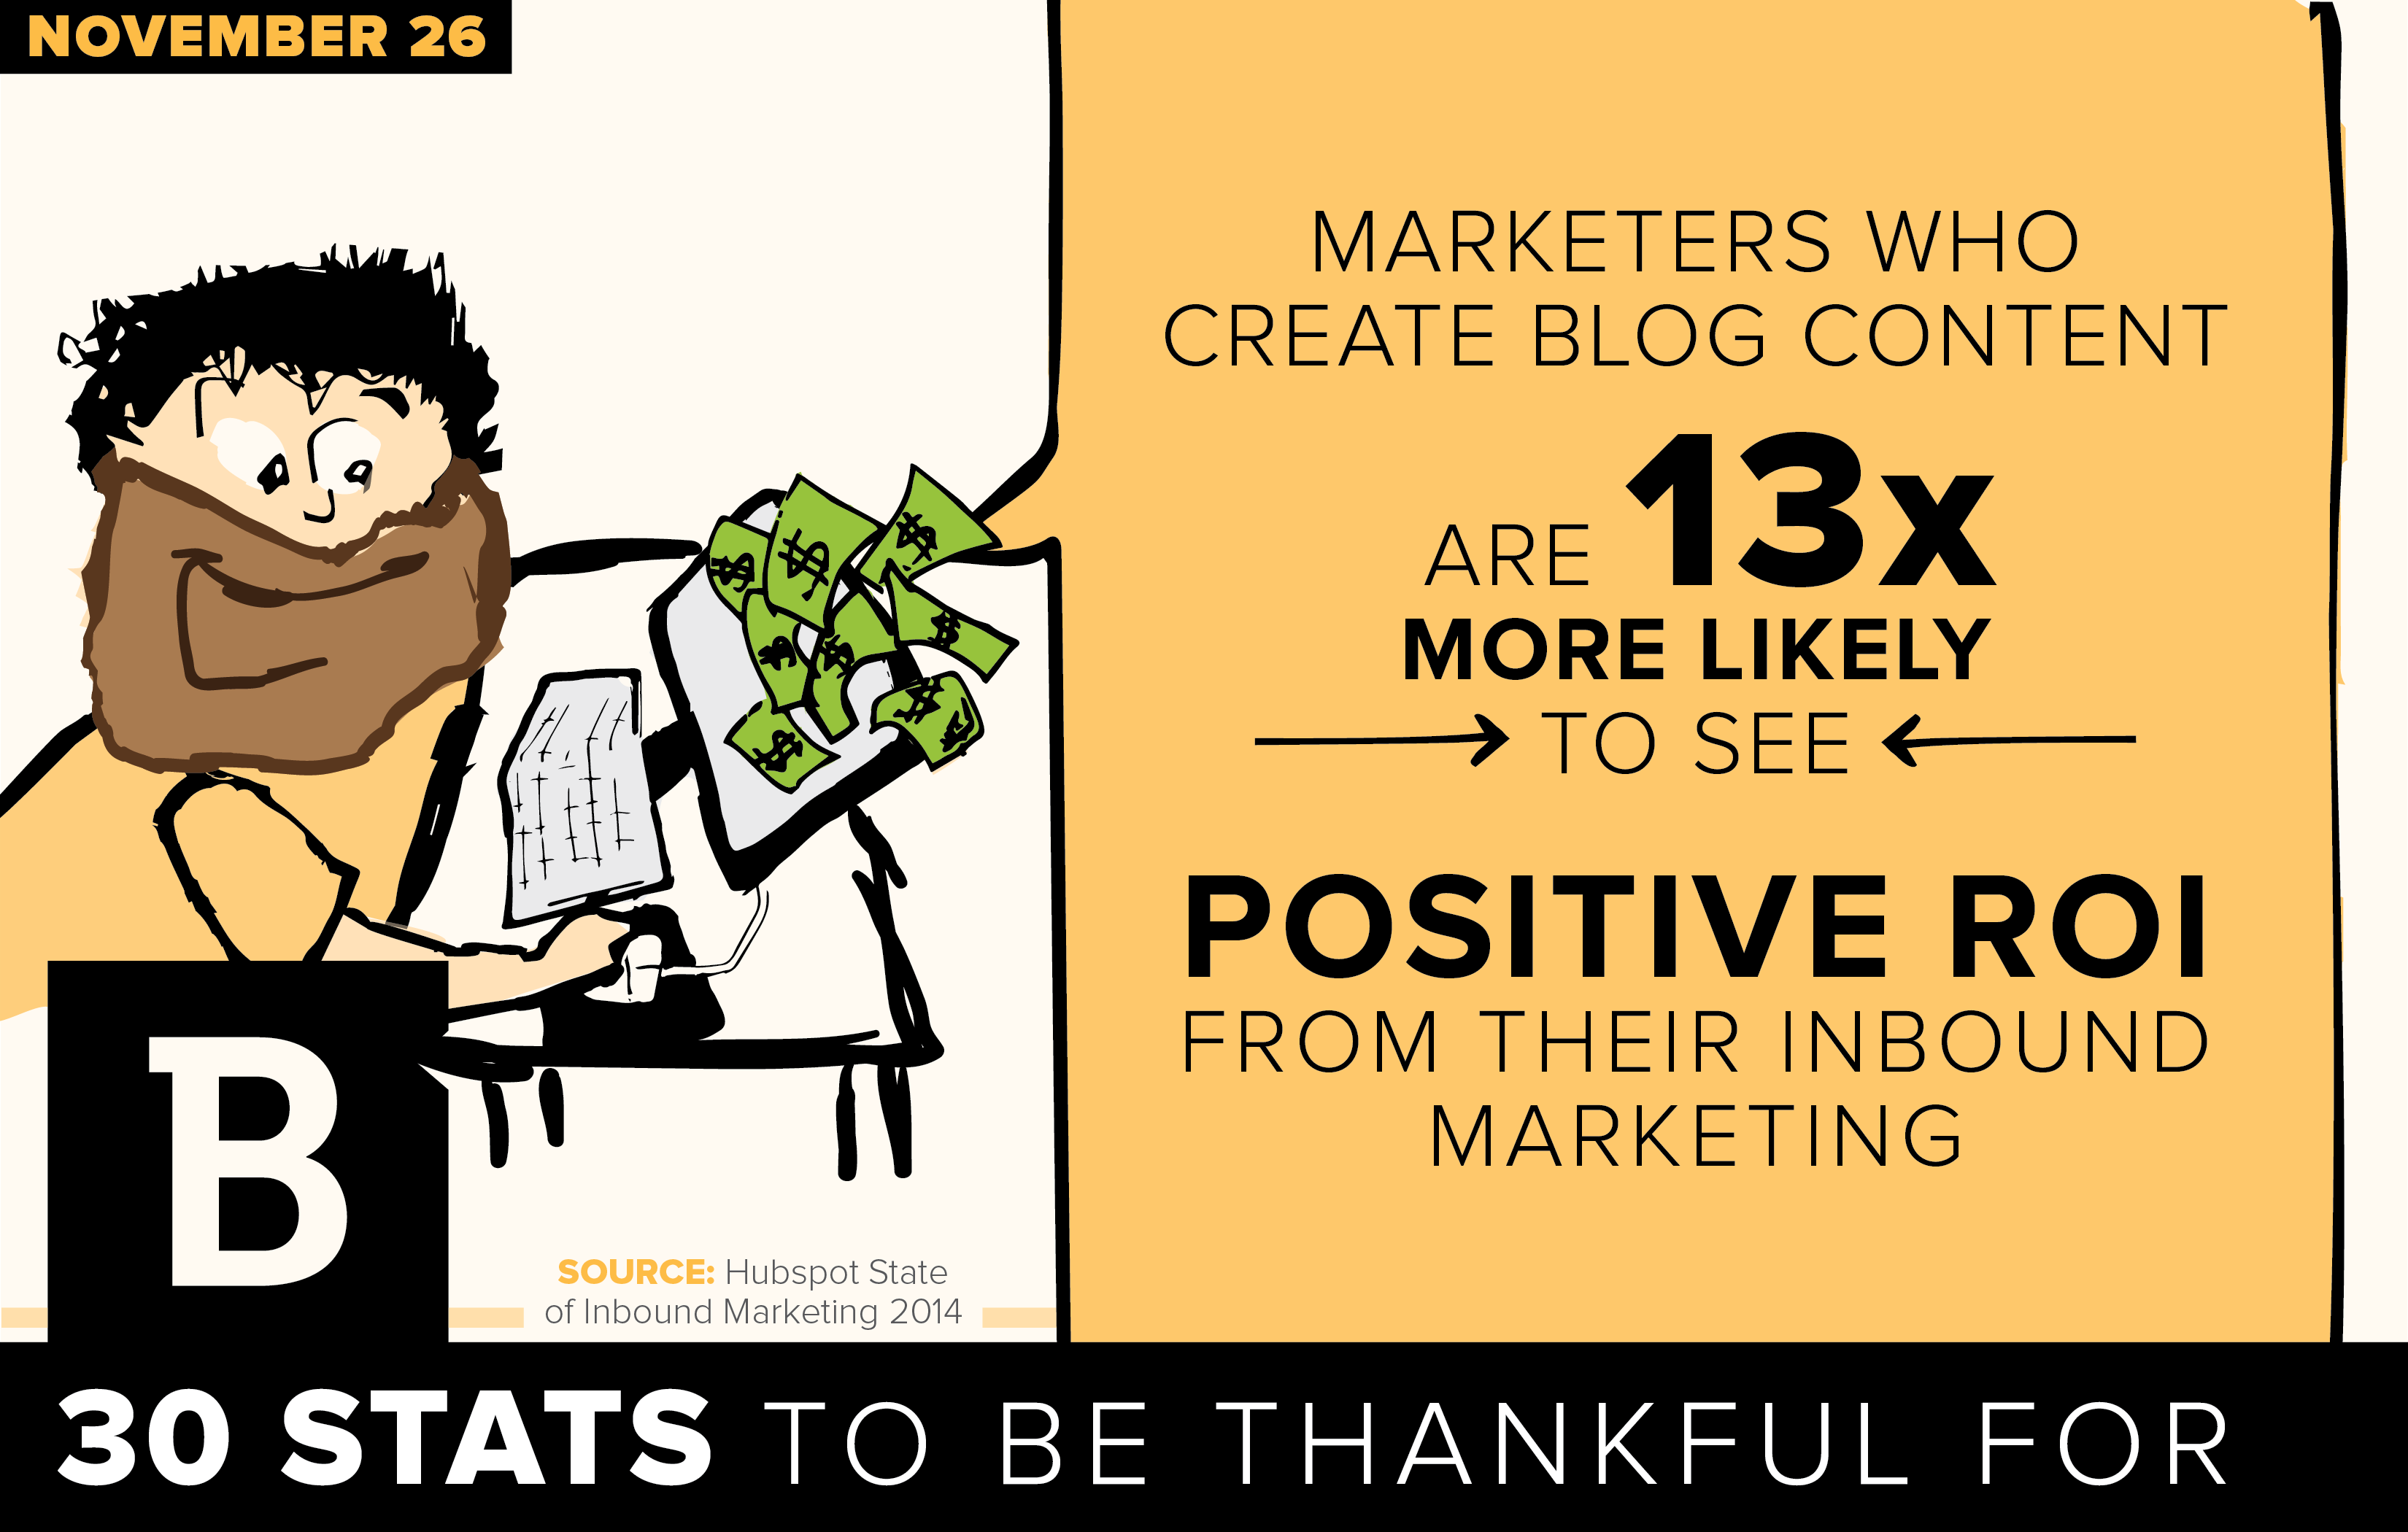 A study found that marketers who blog get the most ROI.